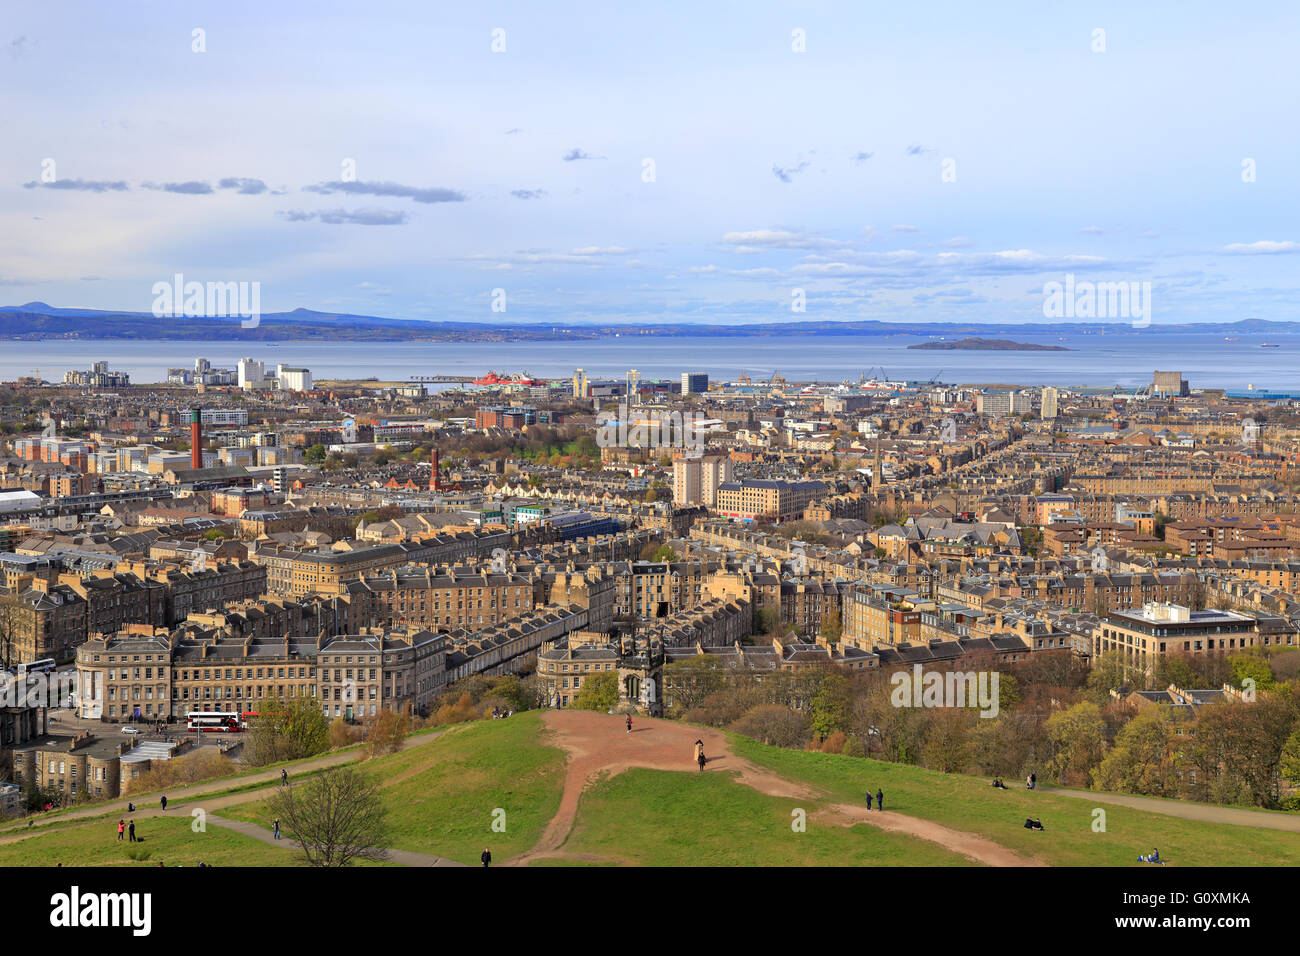 Edinburgh and the Firth of Forth from Nelson Monument on Calton Hill, Edinburgh, Scotland, UK. Stock Photo